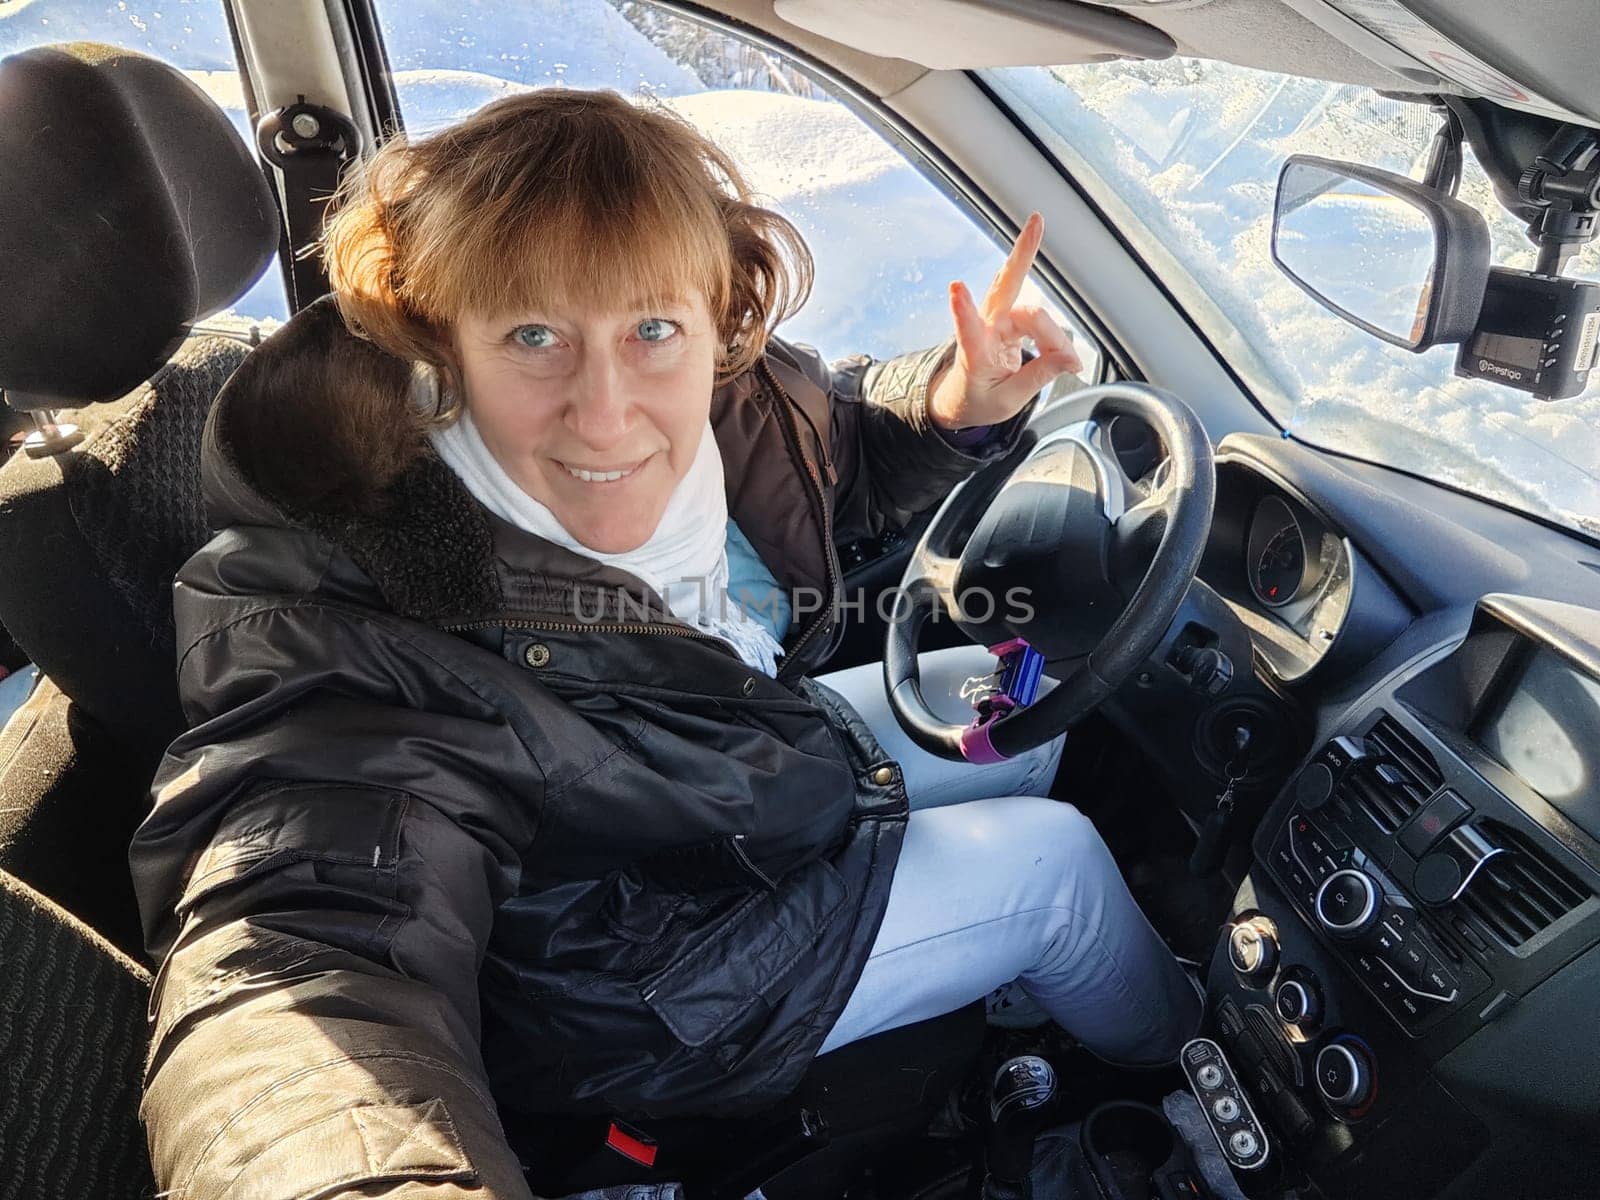 A woman in a car taking a selfie while enjoying a drive. Female driver in warm jacket posing inside car in warm jacket on a cold day